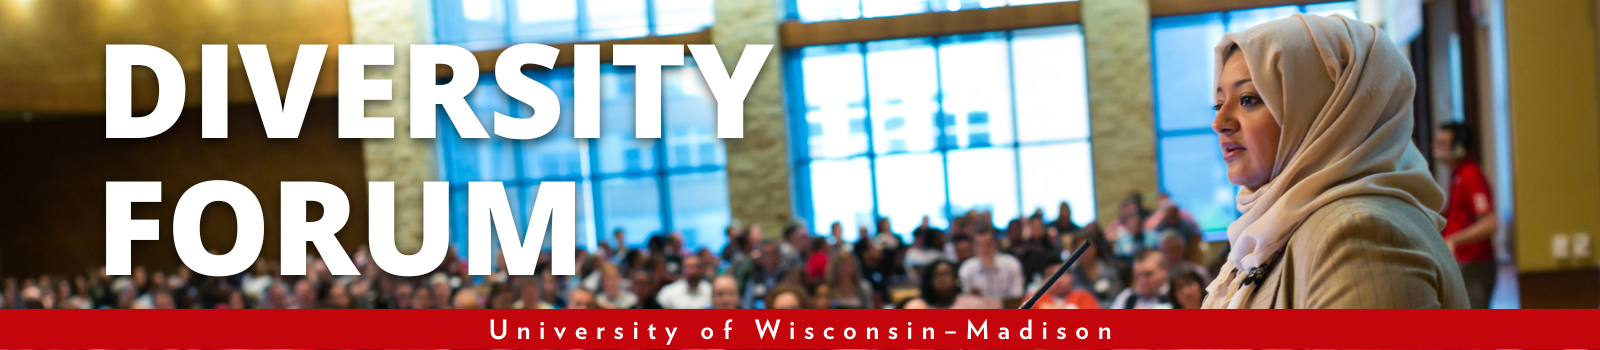 A woman wearing a head scarf speaks into a microphone in front of a large audience with the words "Diversity Forum. University of Wisconsin–Madison."